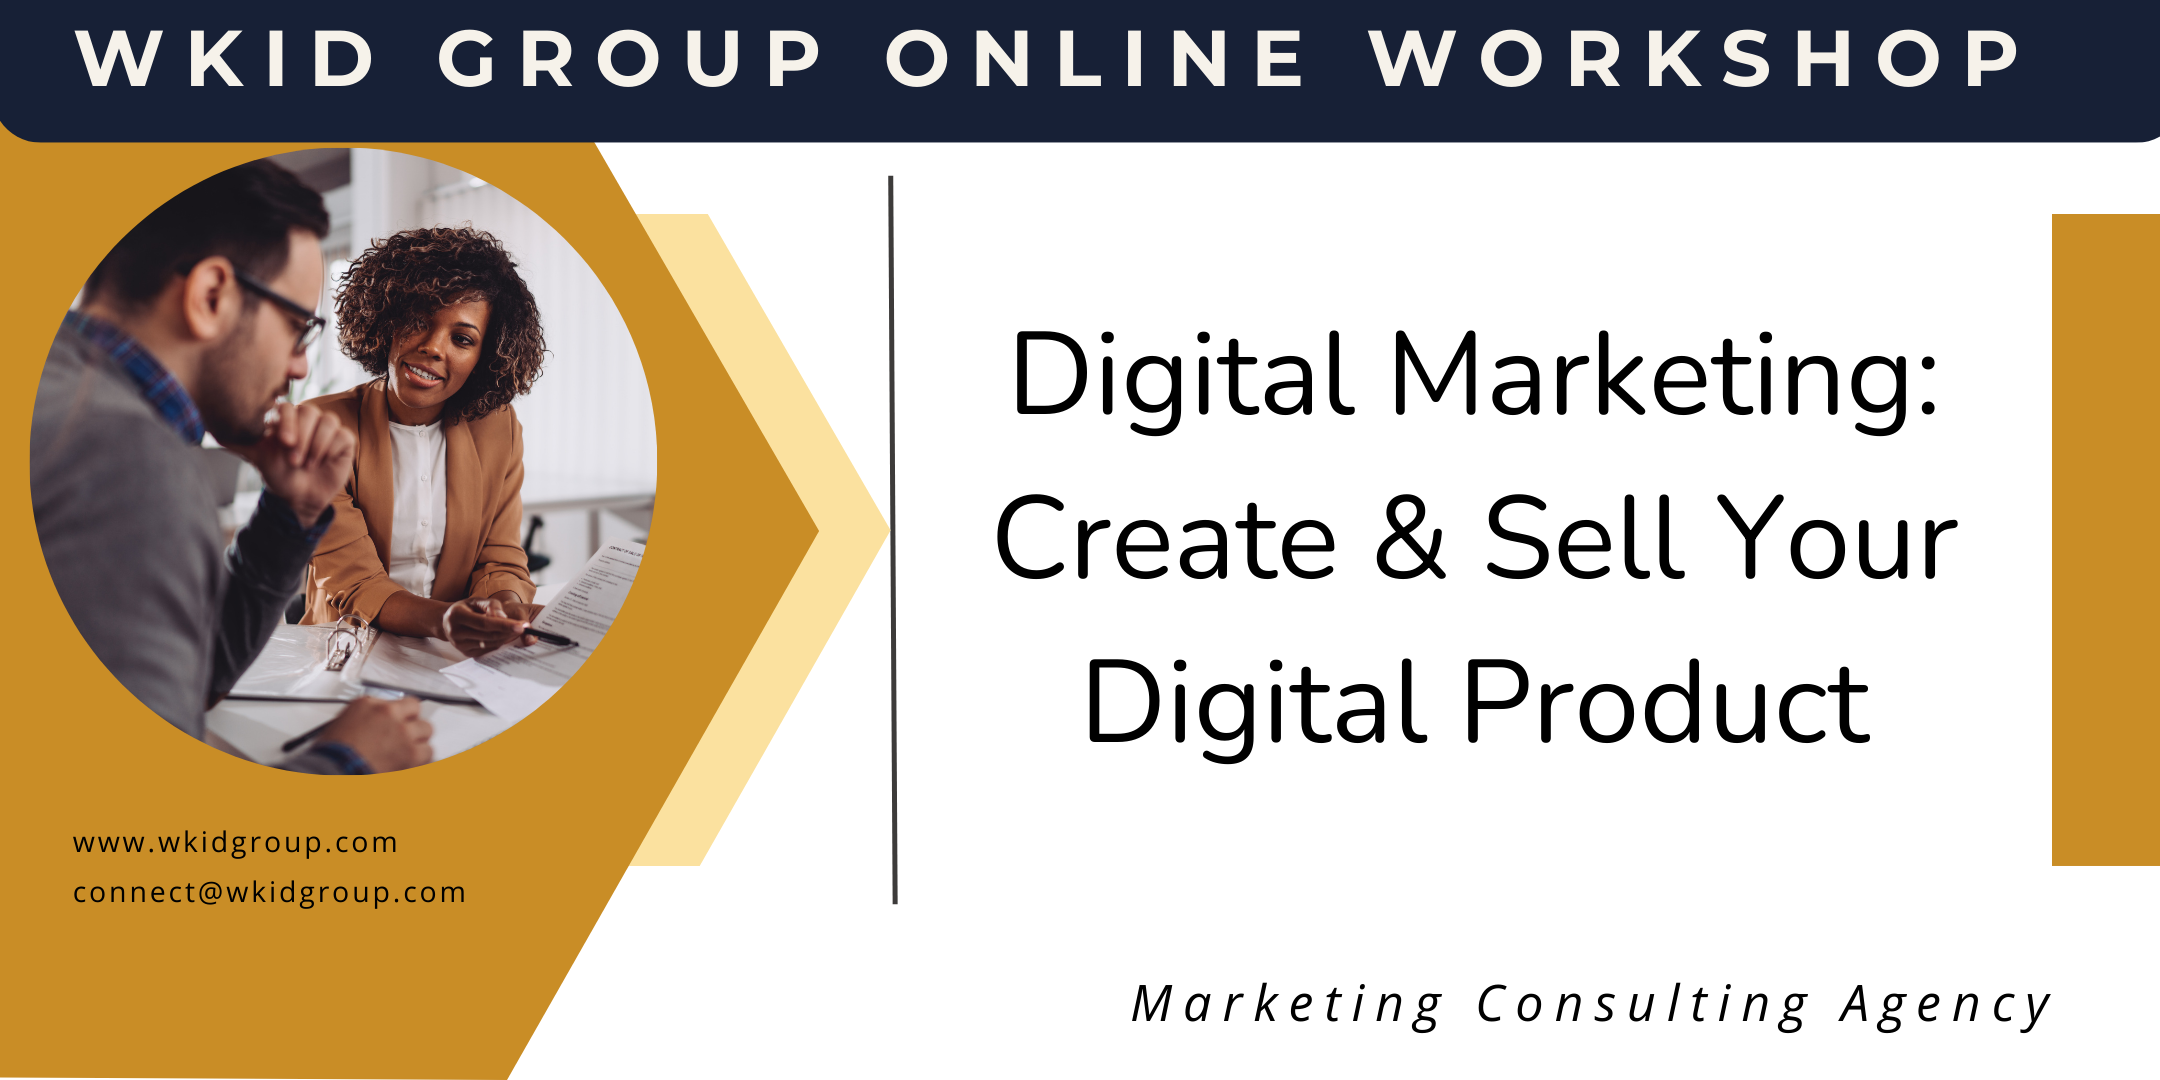 Digital Marketing Workshop | How To Create & Sell A Digital Product